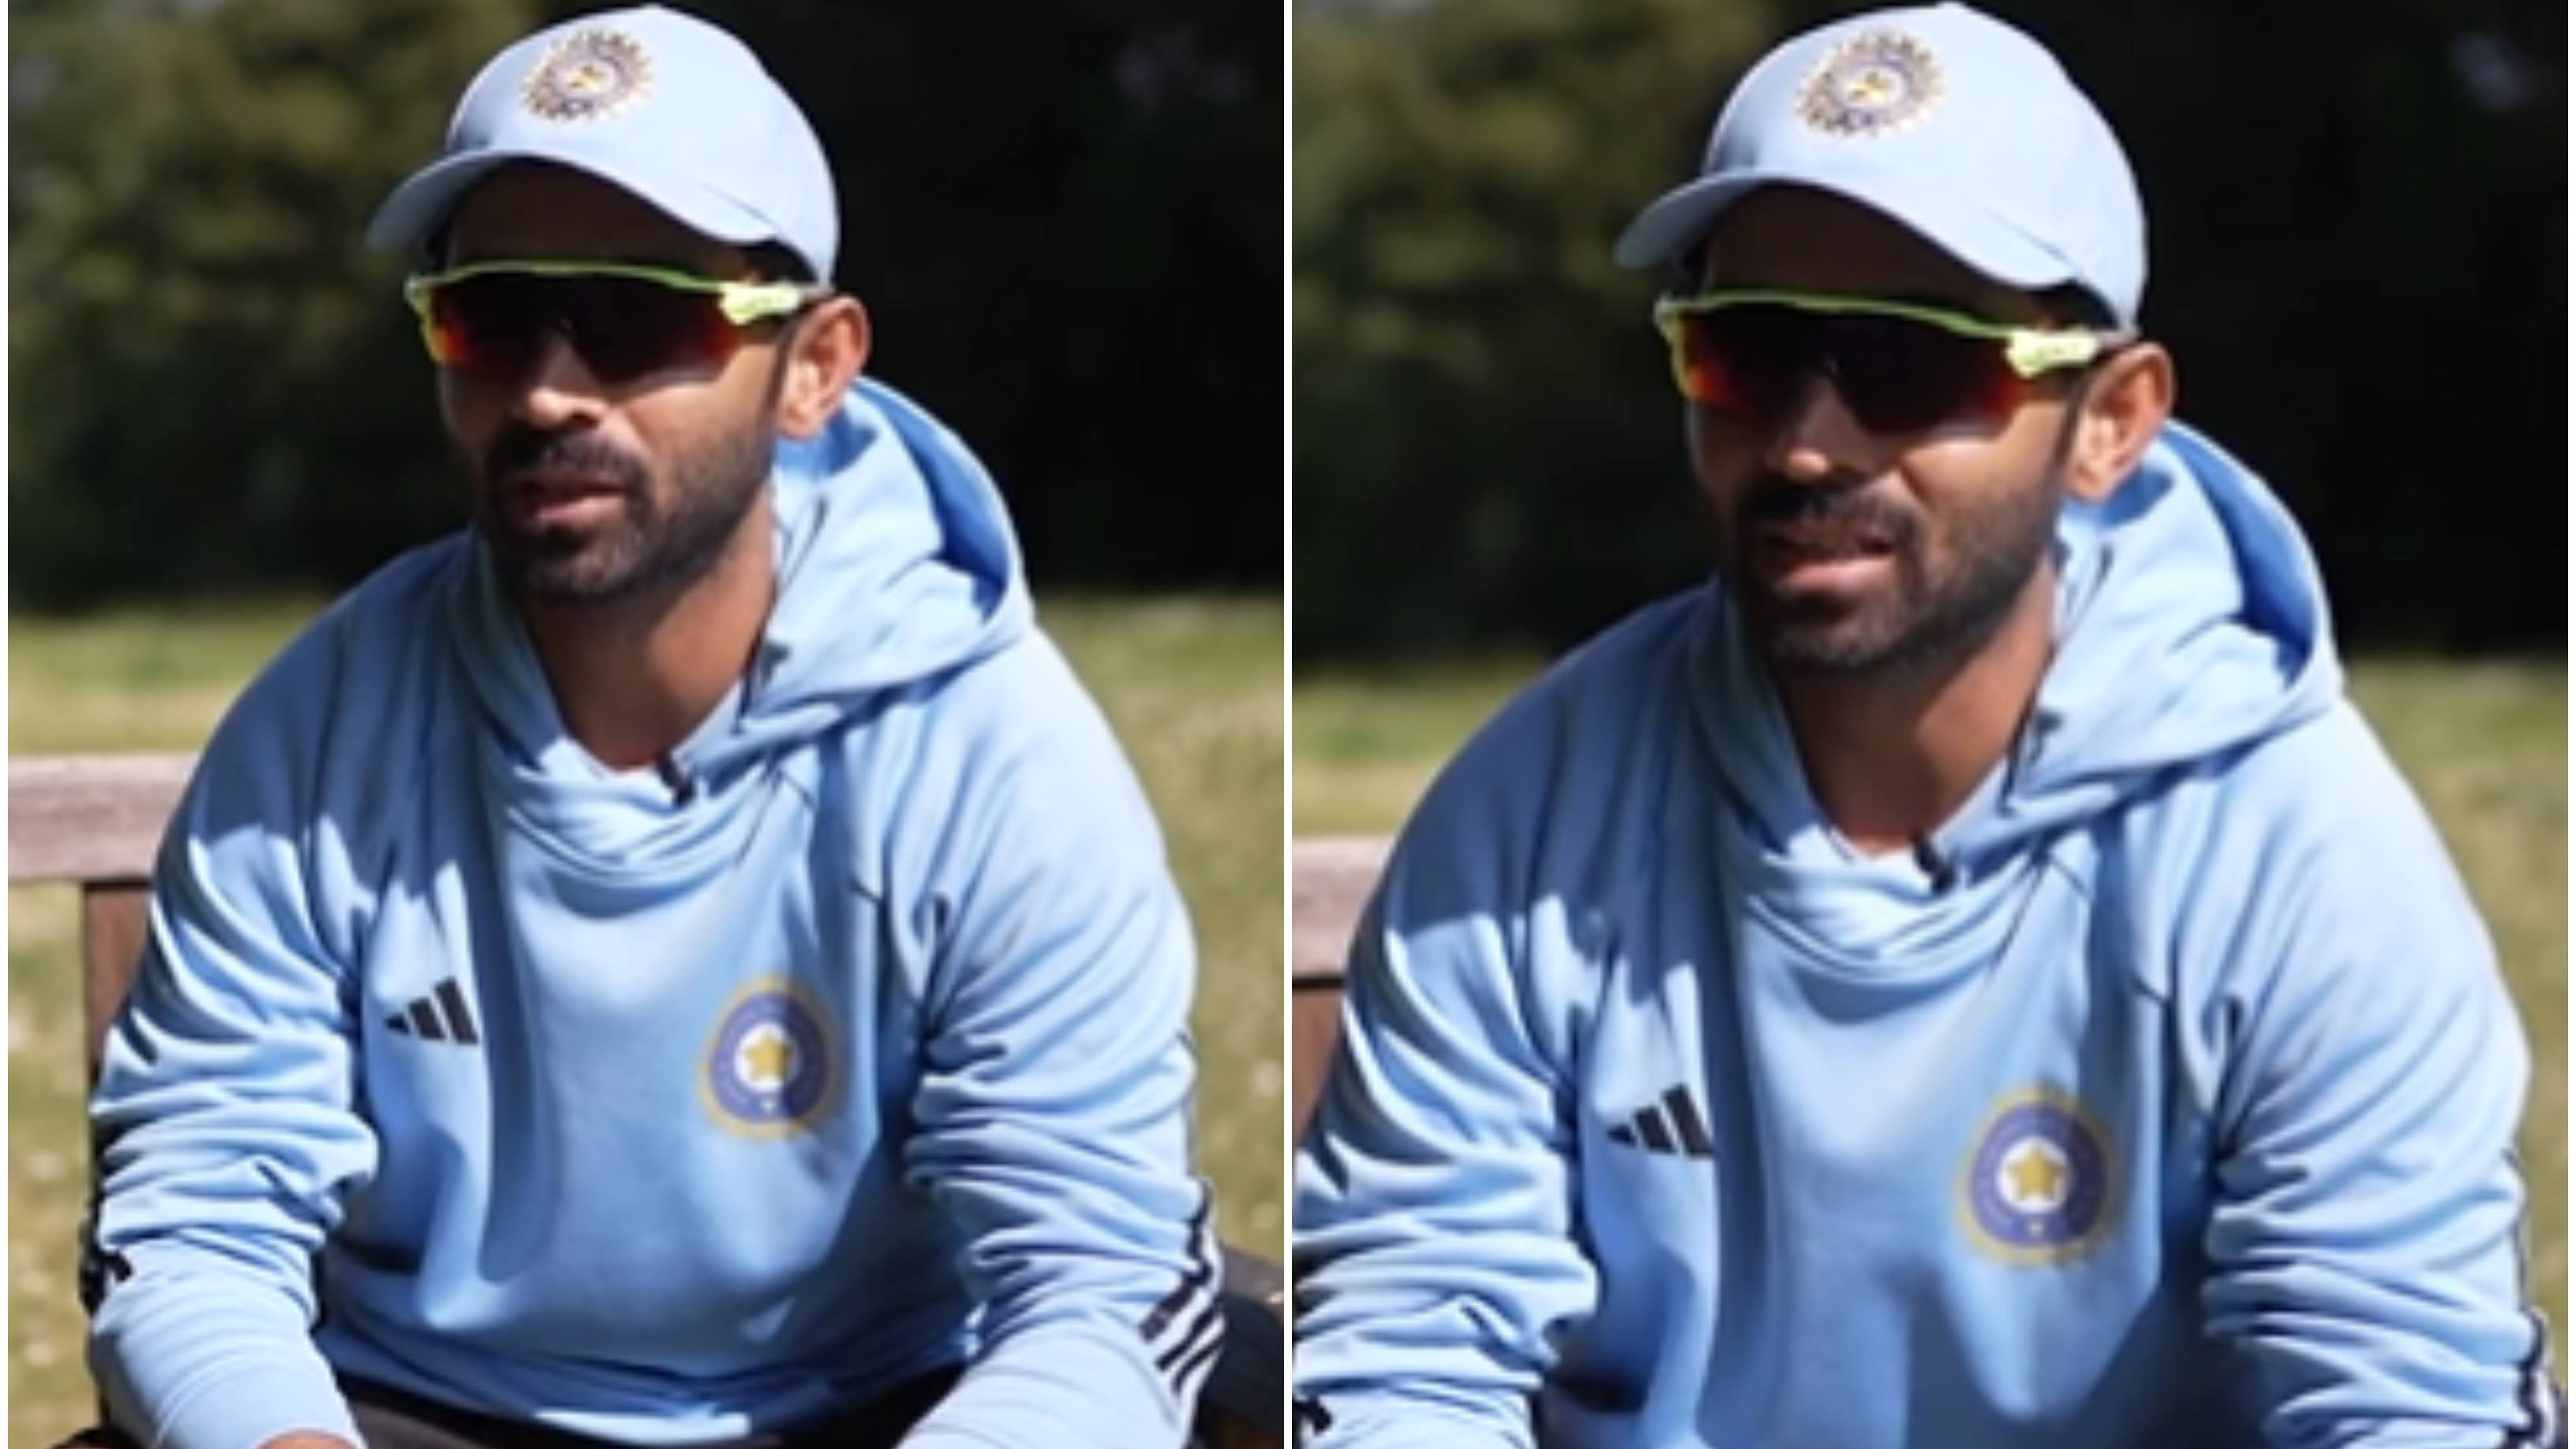 WATCH: “Don't want to think about past, want to start afresh,” says Rahane after returning to Indian Test team for WTC final